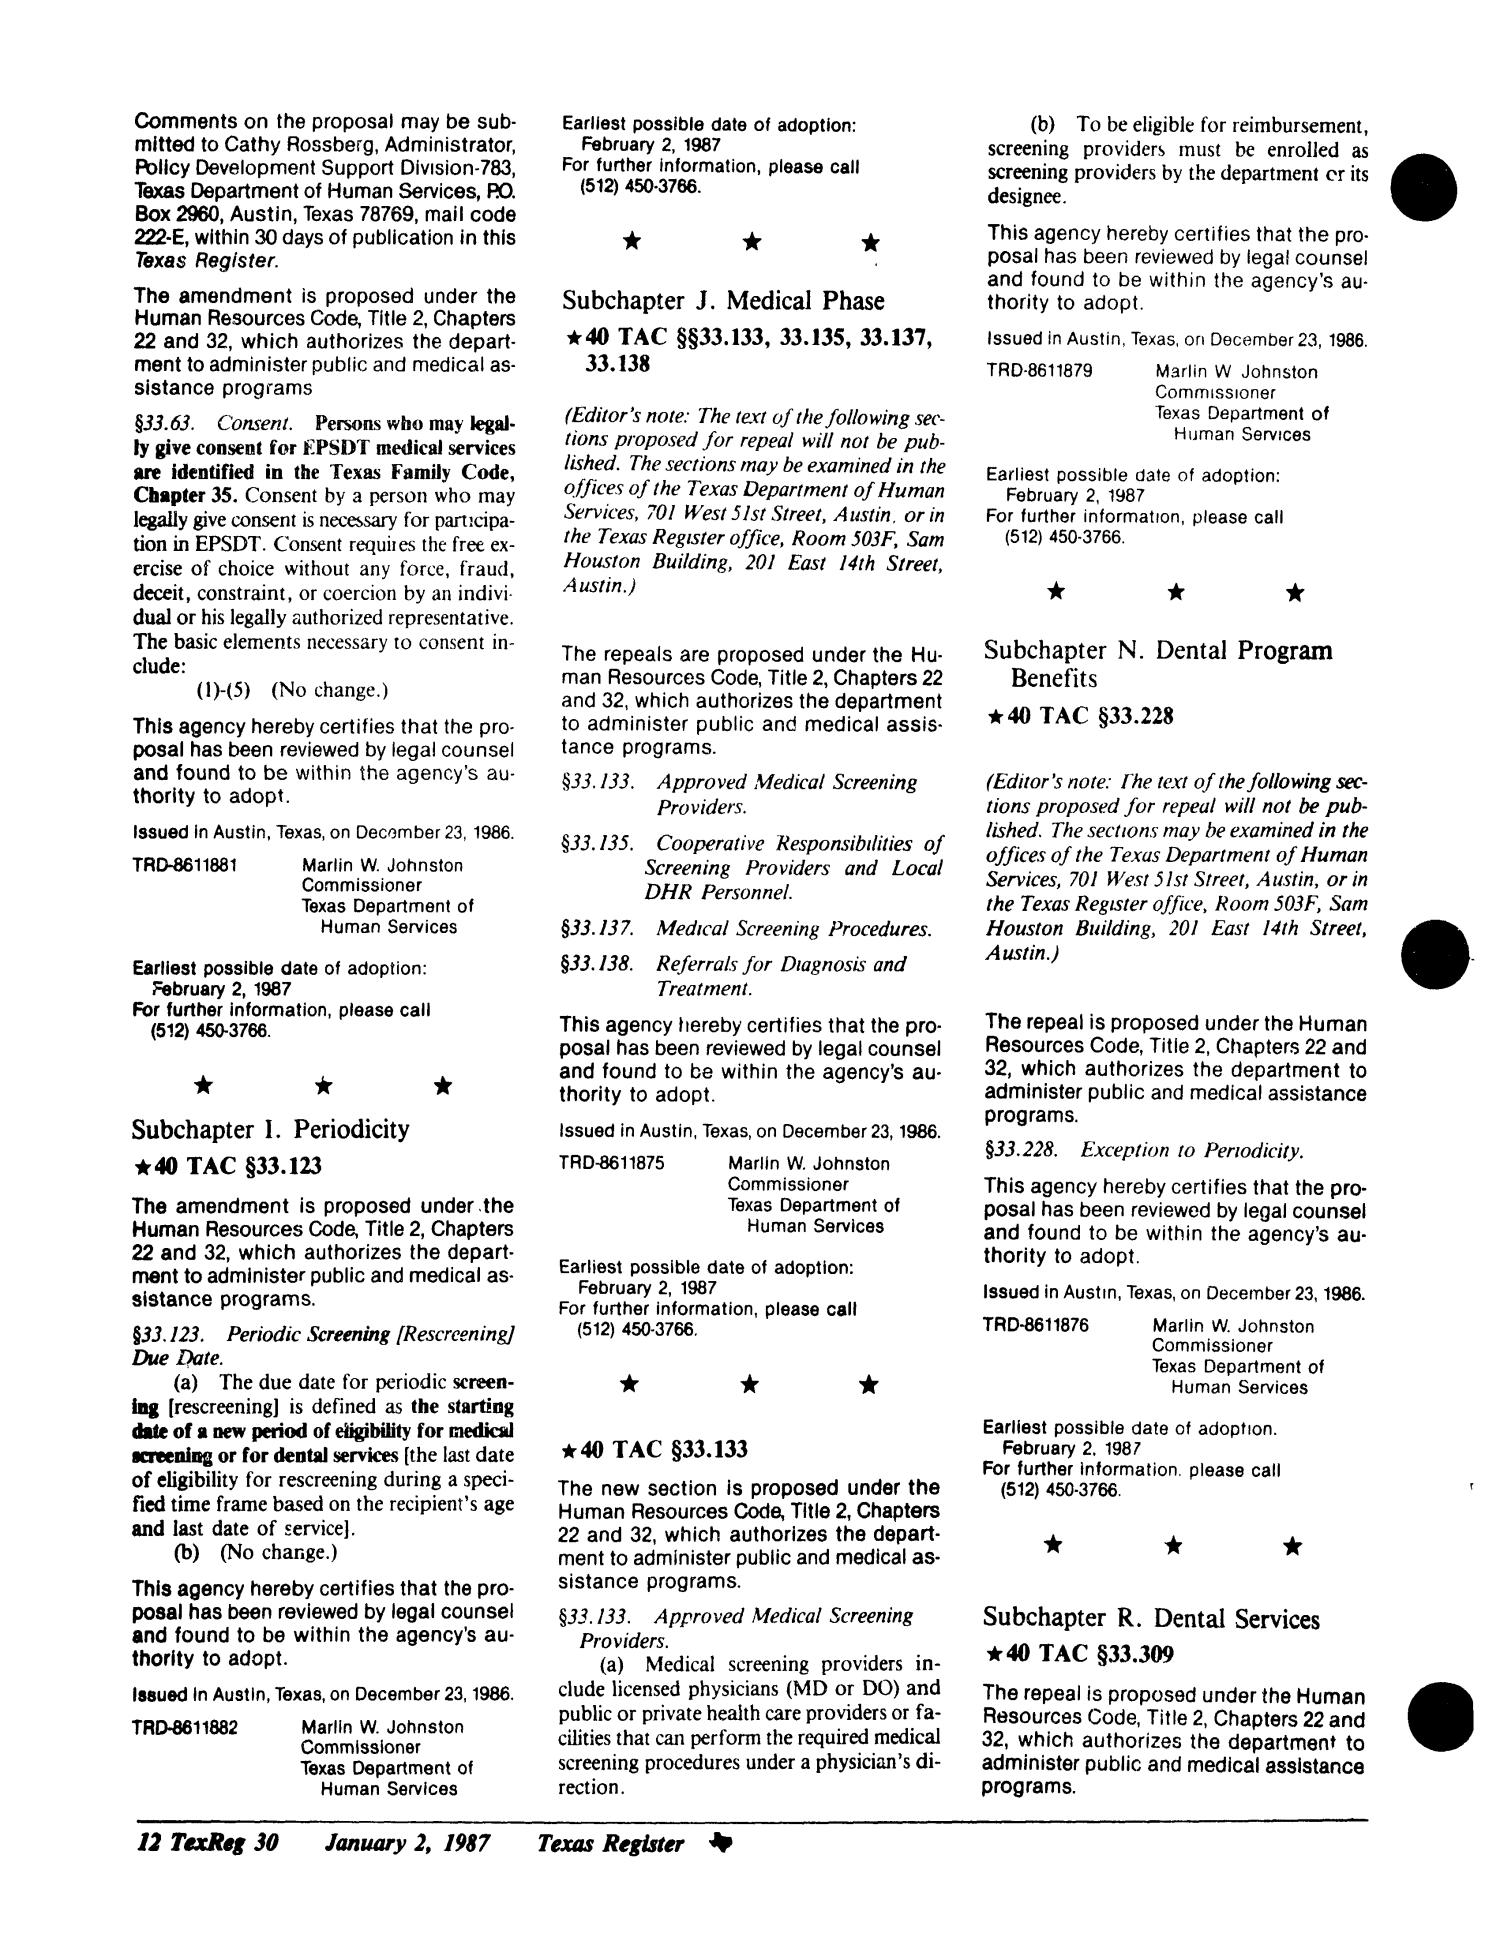 Texas Register, Volume 12, Number 1, Pages 1-51, January 2, 1987
                                                
                                                    30
                                                